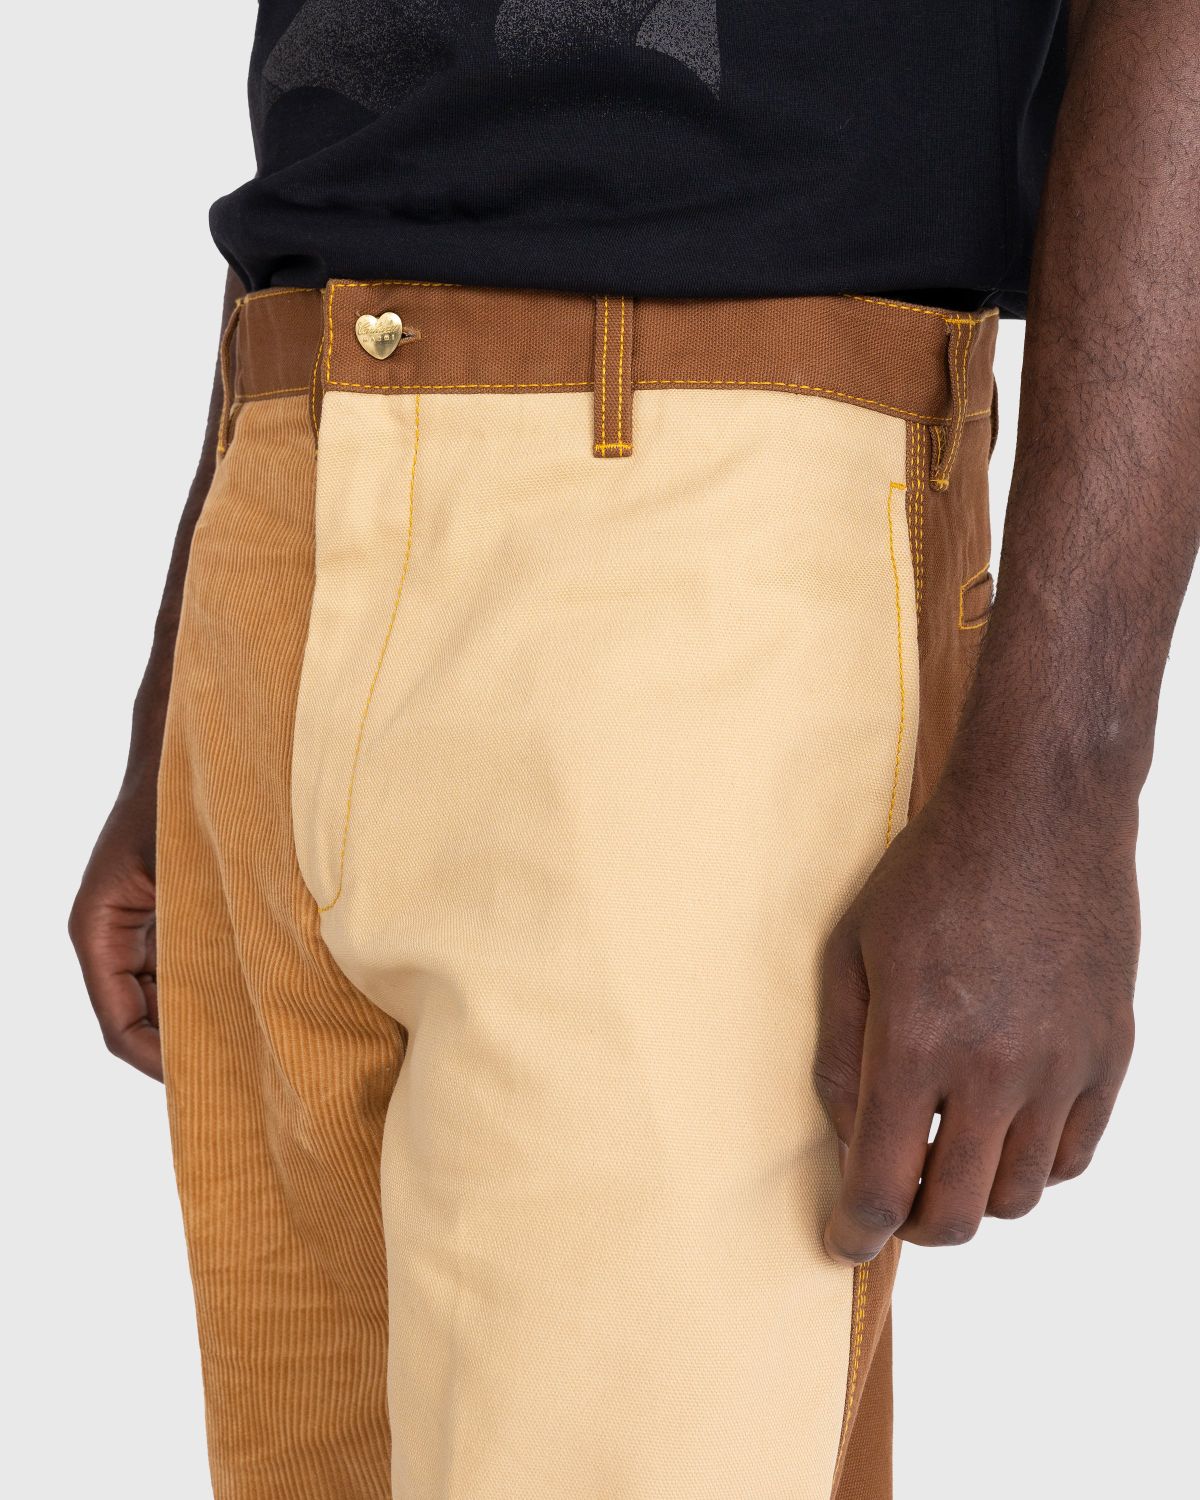 Marni x Carhartt WIP – Colorblocked Trousers Brown - Trousers - Brown - Image 6